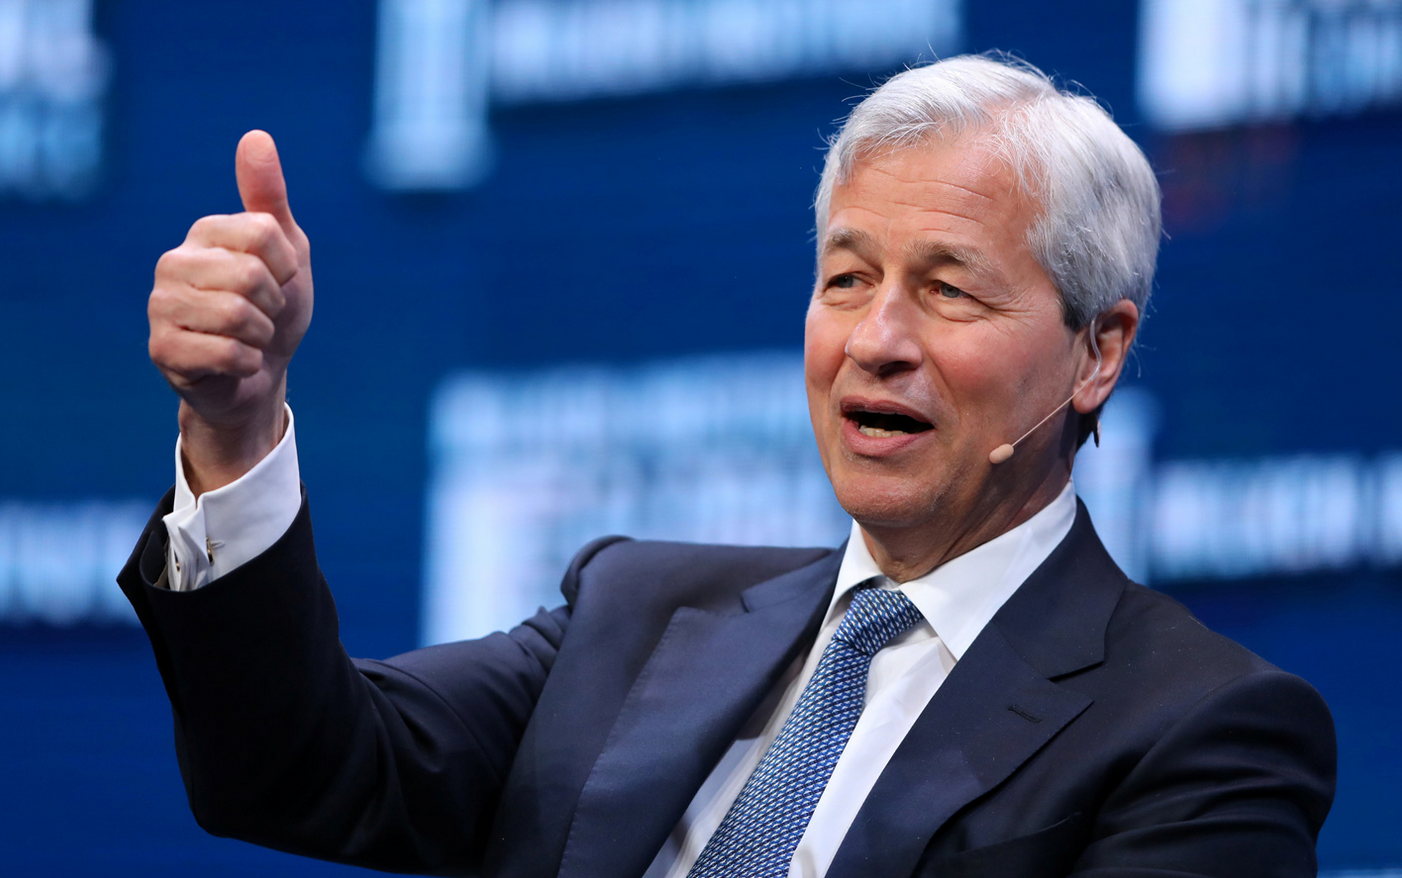 JPMorgan Sees Negative GDP Growth In Addition To Negative Interest Rates (#GotBitcoin?)